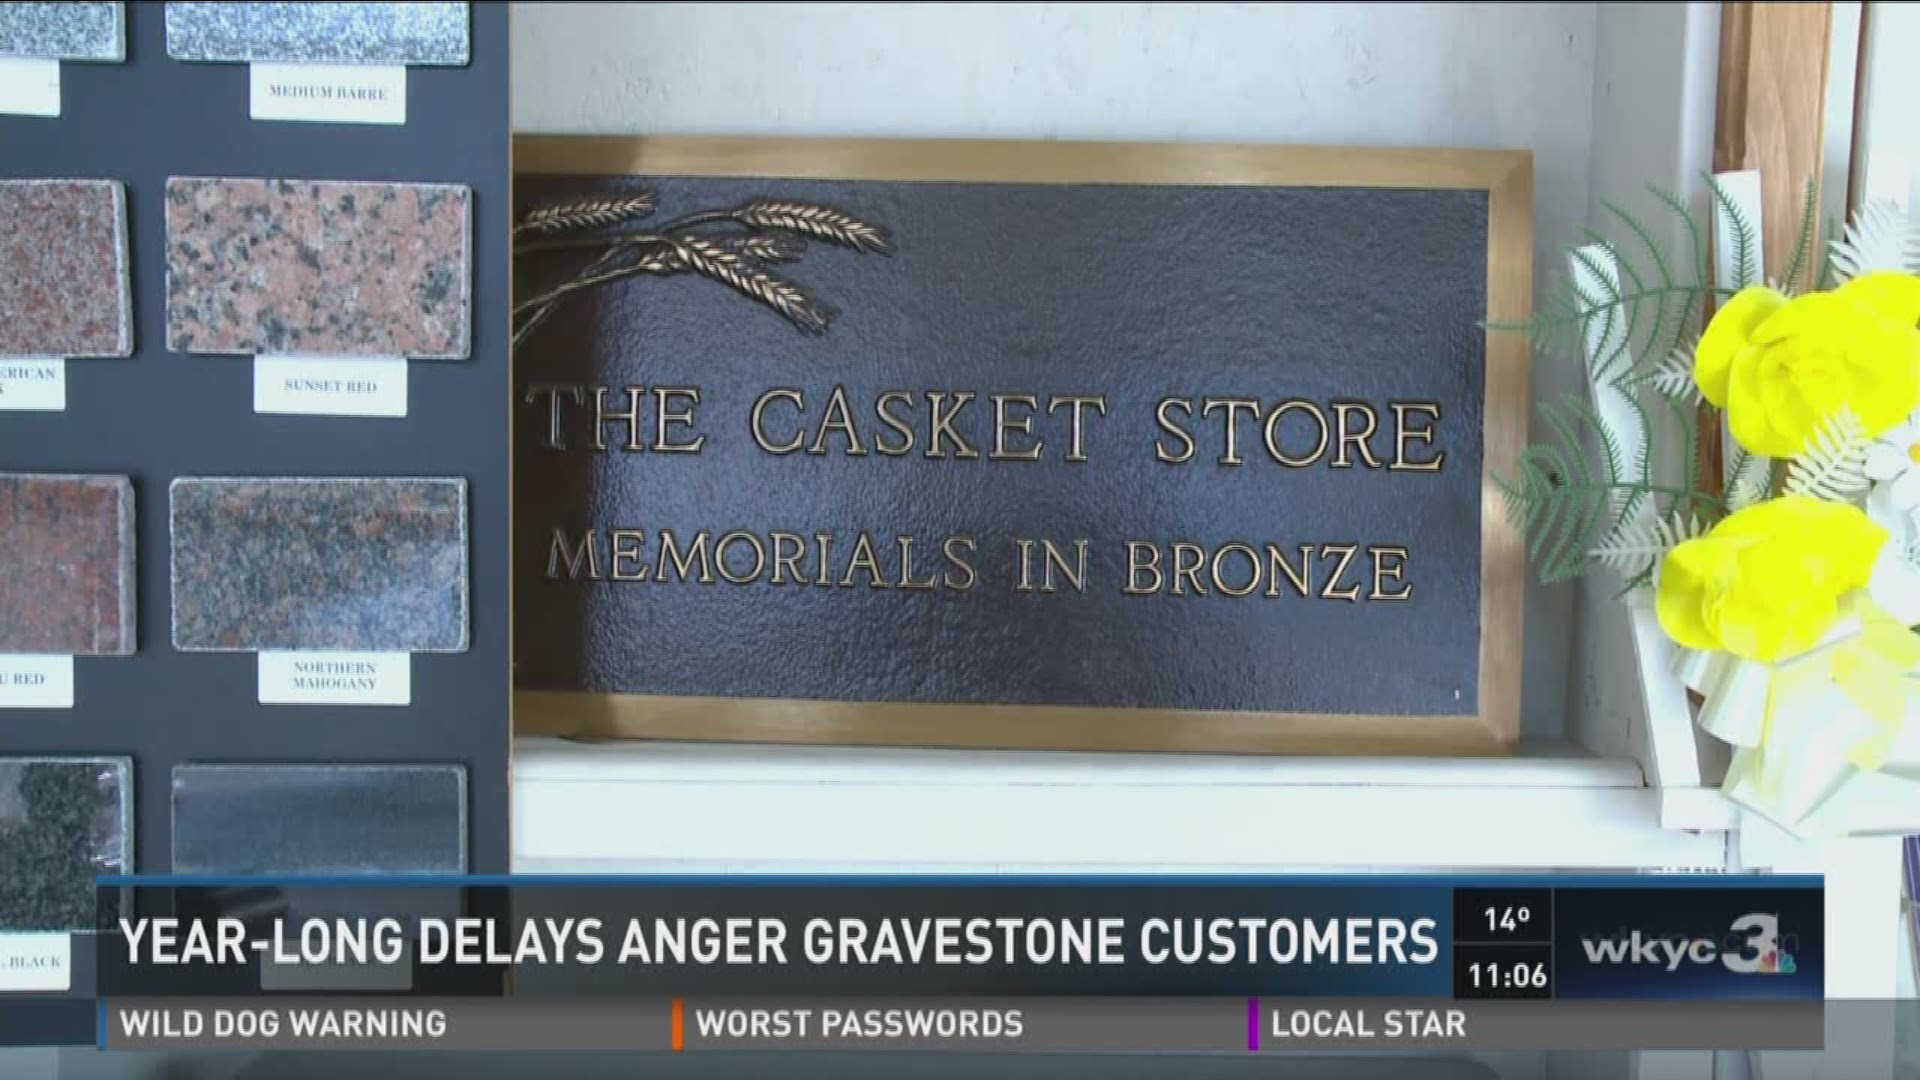 Grief-stricken Clevelanders complain that gravestones they ordered more than a year ago still haven't been delivered as promised.